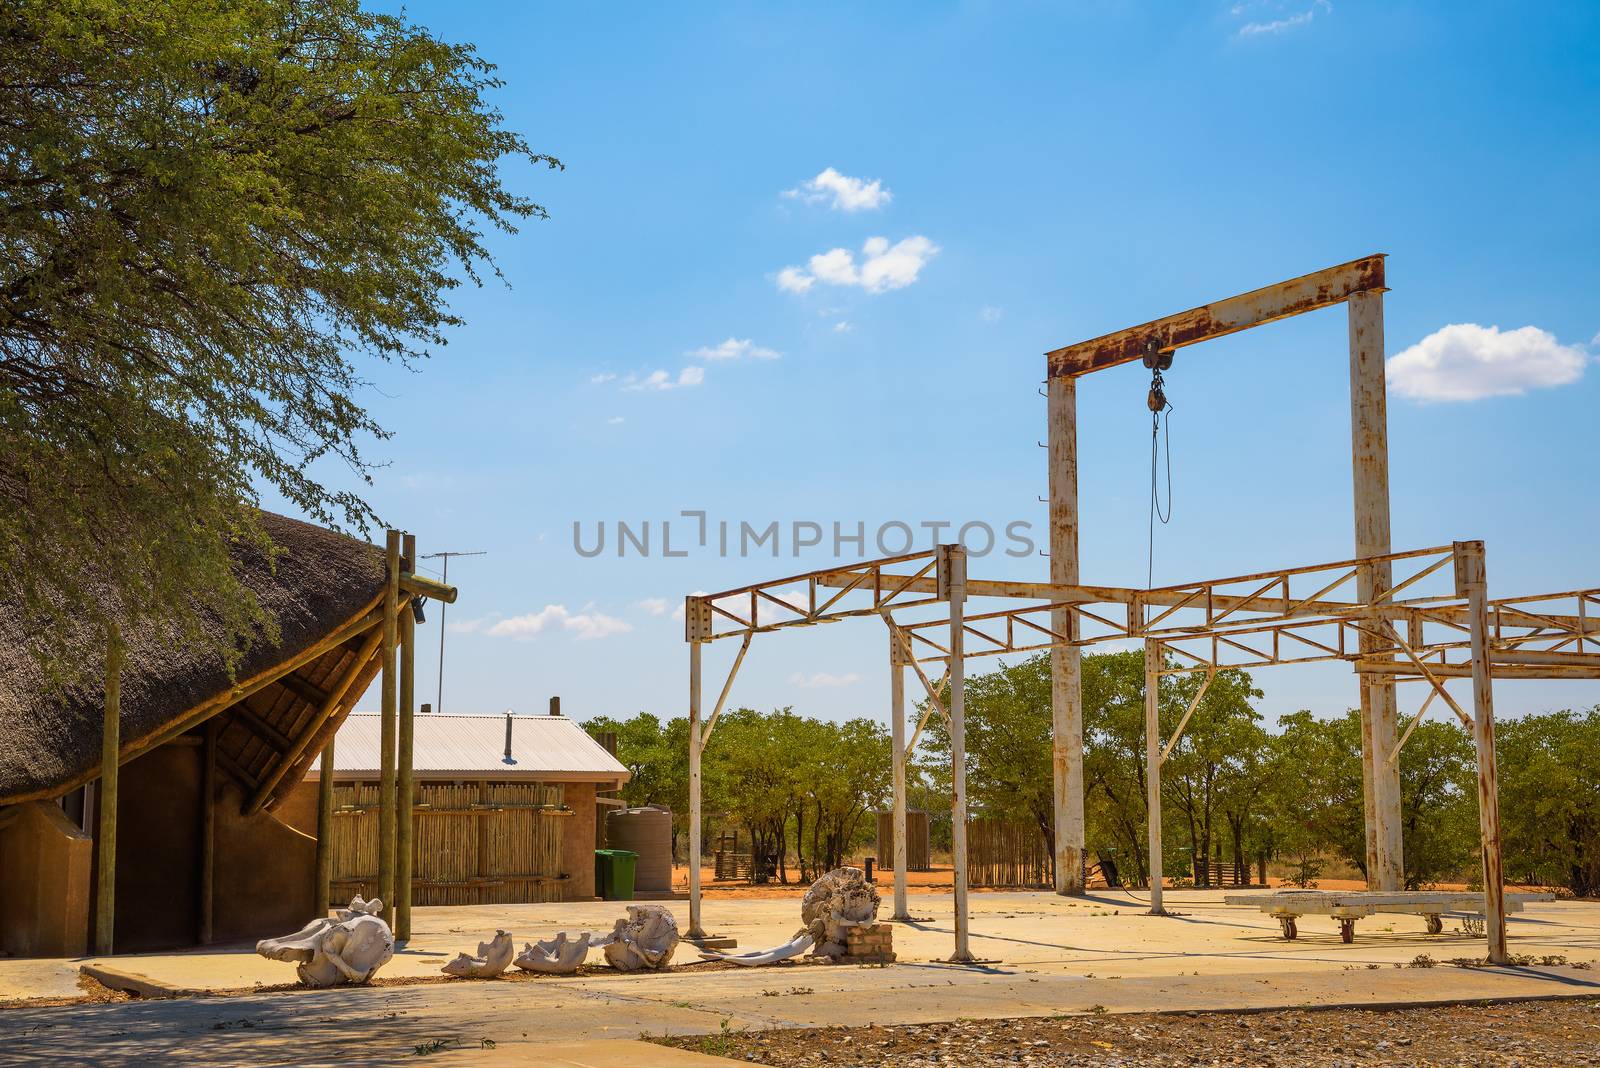 Historic elephant slaughter abattoir at the Olifantsrus Rest Campsite located in Etosha National Park, Namibia. 525 elephants were killed at this facility in two seasons during 1983 and 1985.